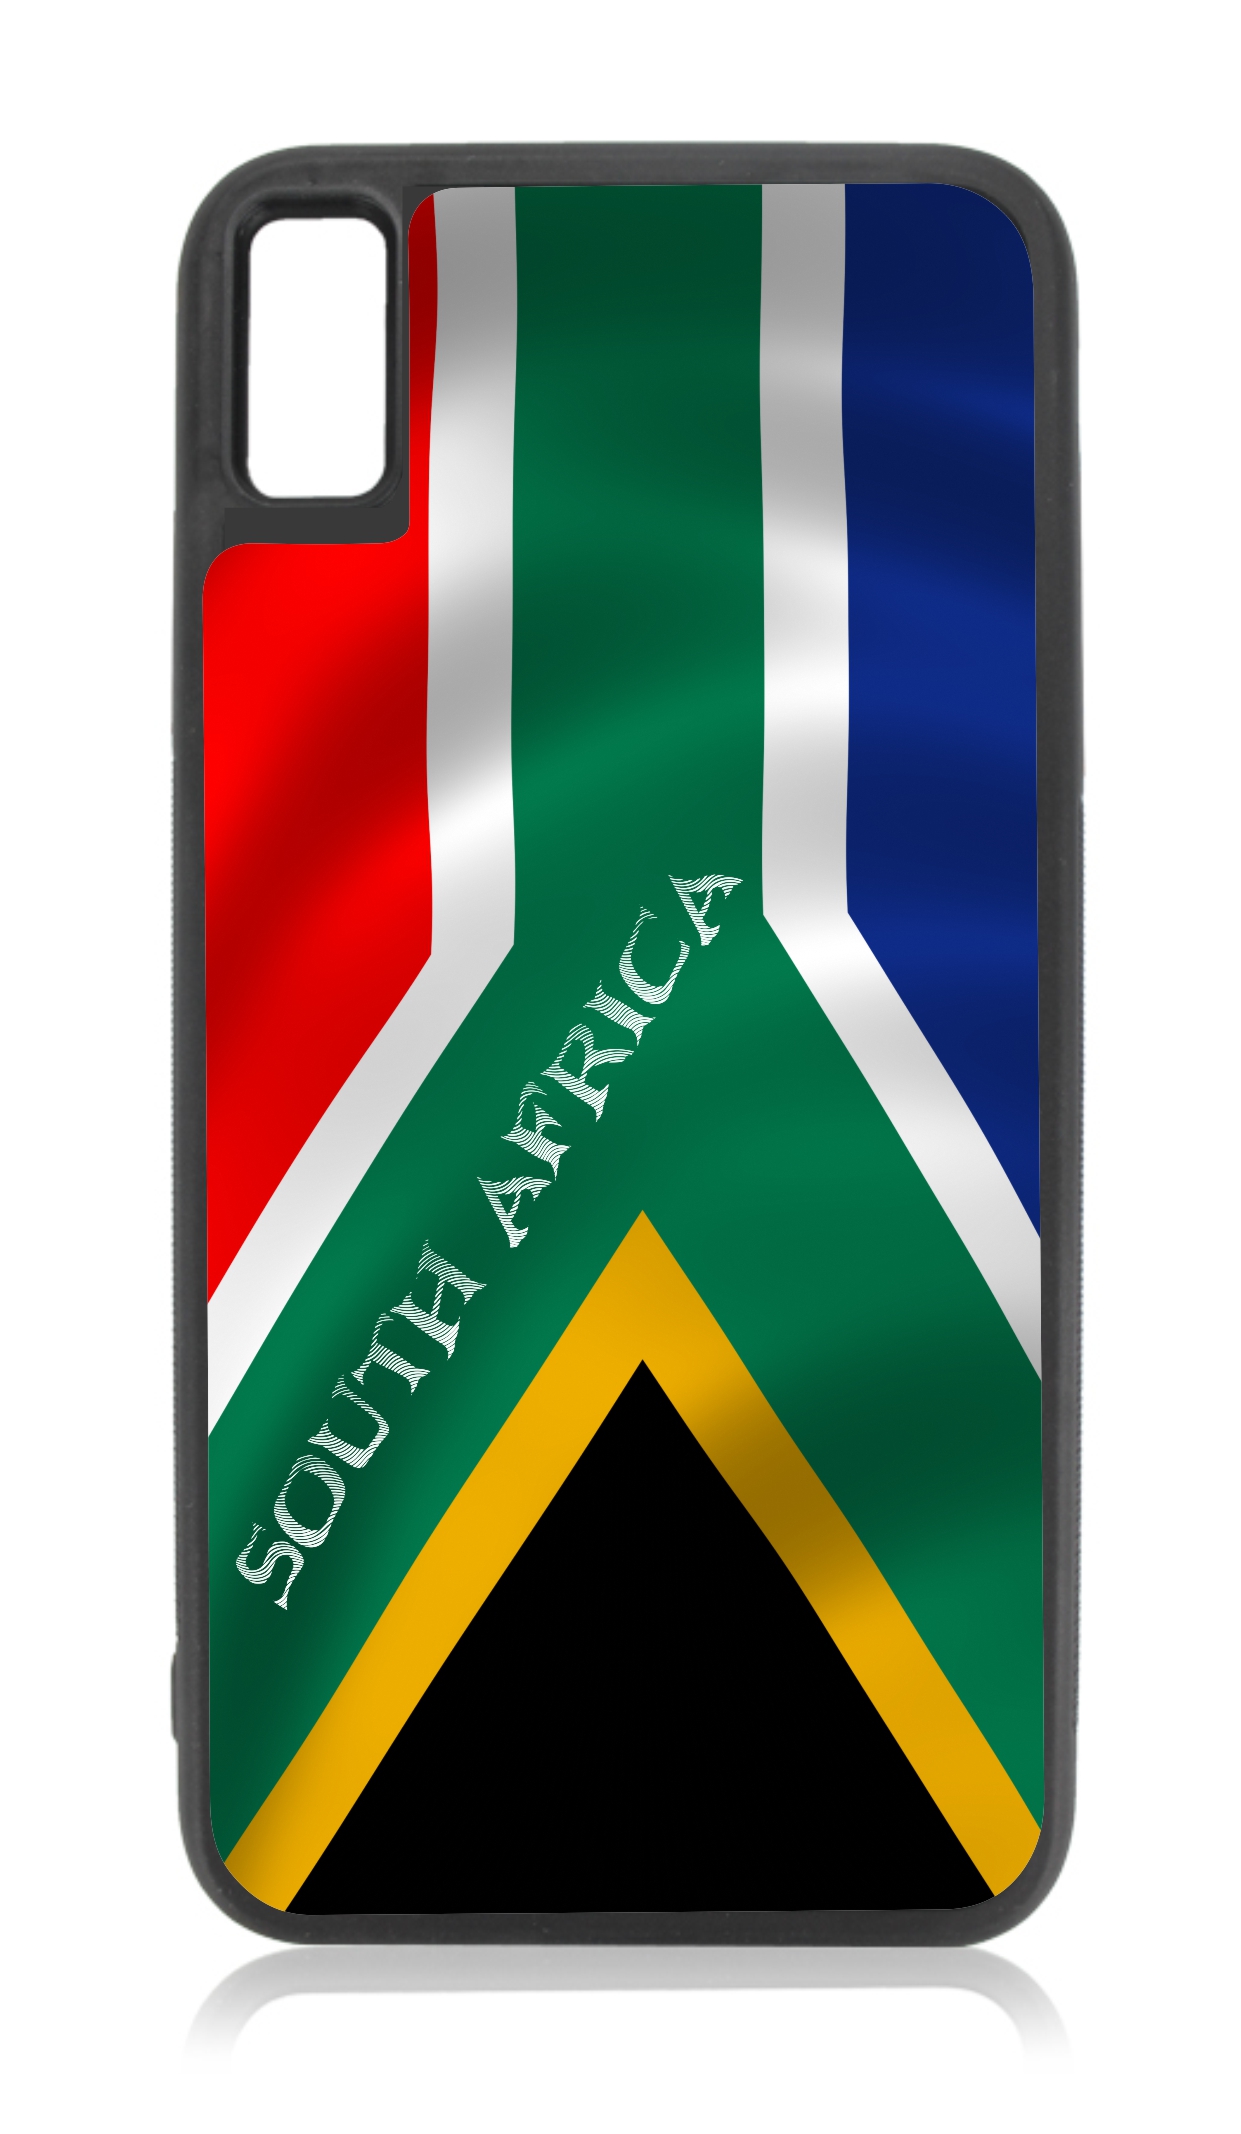 South African Waving Flag Print Design Black Rubber Case Cover for the Apple iPhone 10 / iPhone X / iPhone XS - iPhone 10 Case - iPhone X Case - iPhone XS Case - image 1 of 1